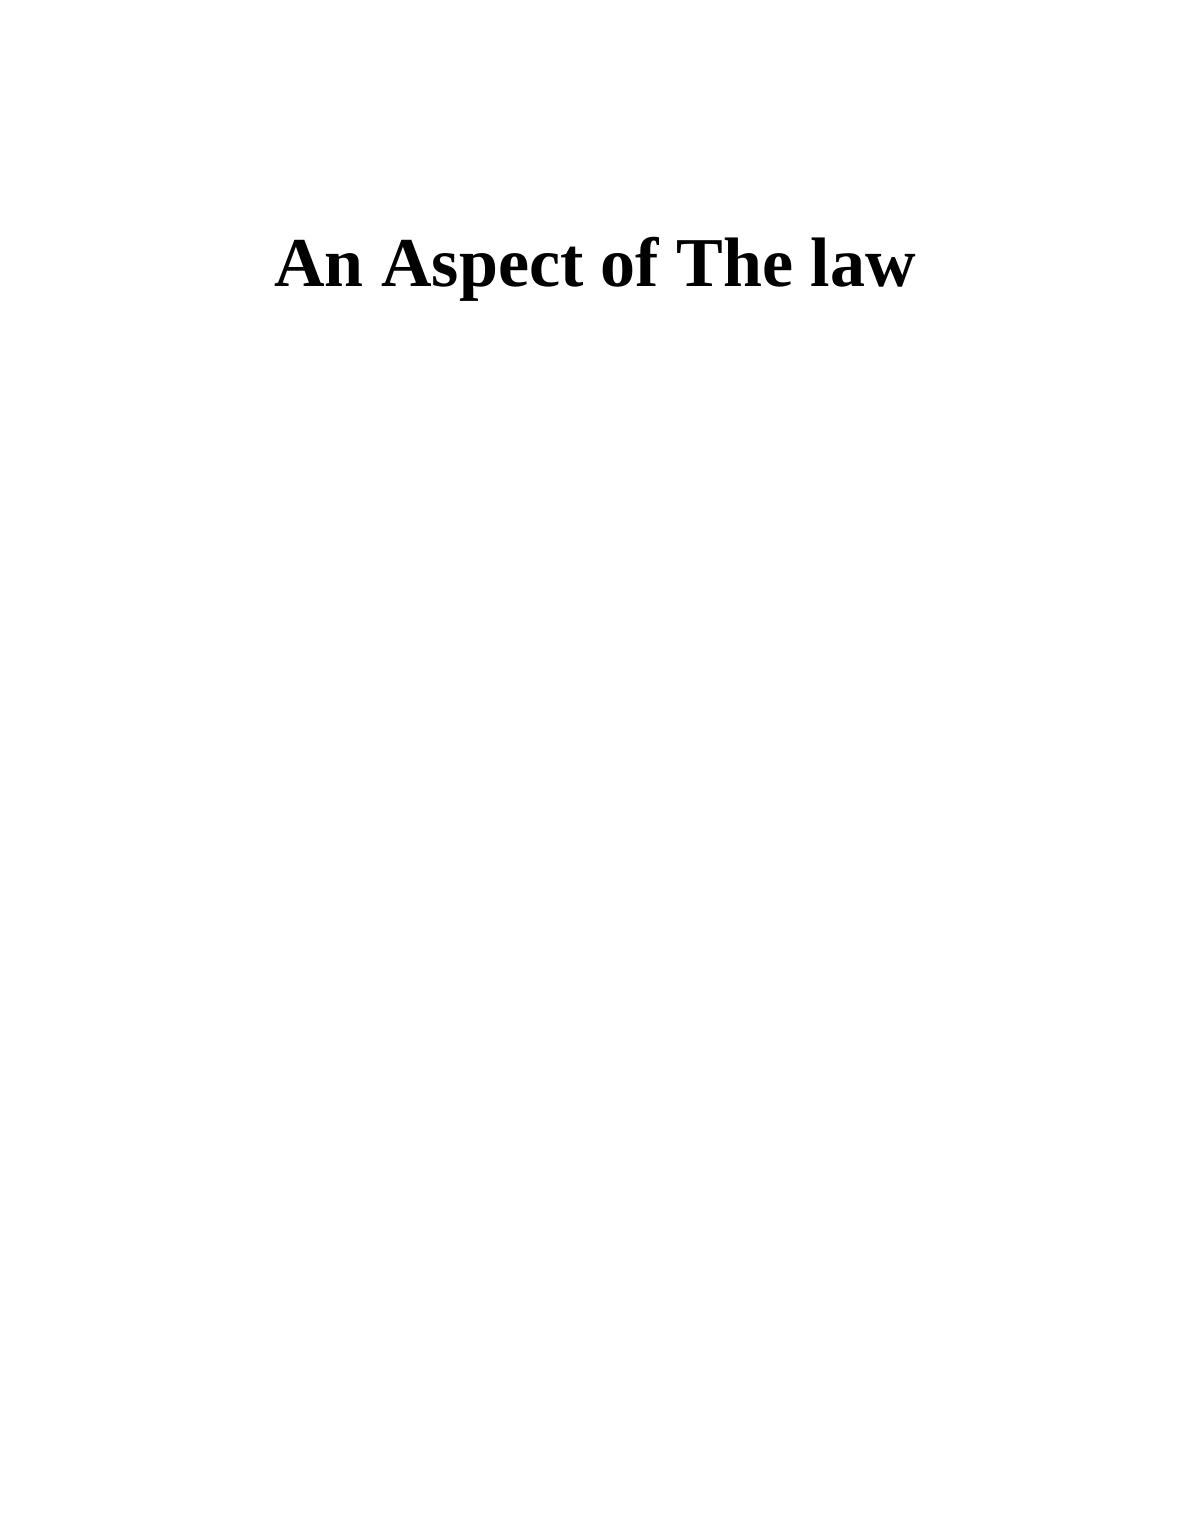 An Aspect of The law : Law Assignment_1